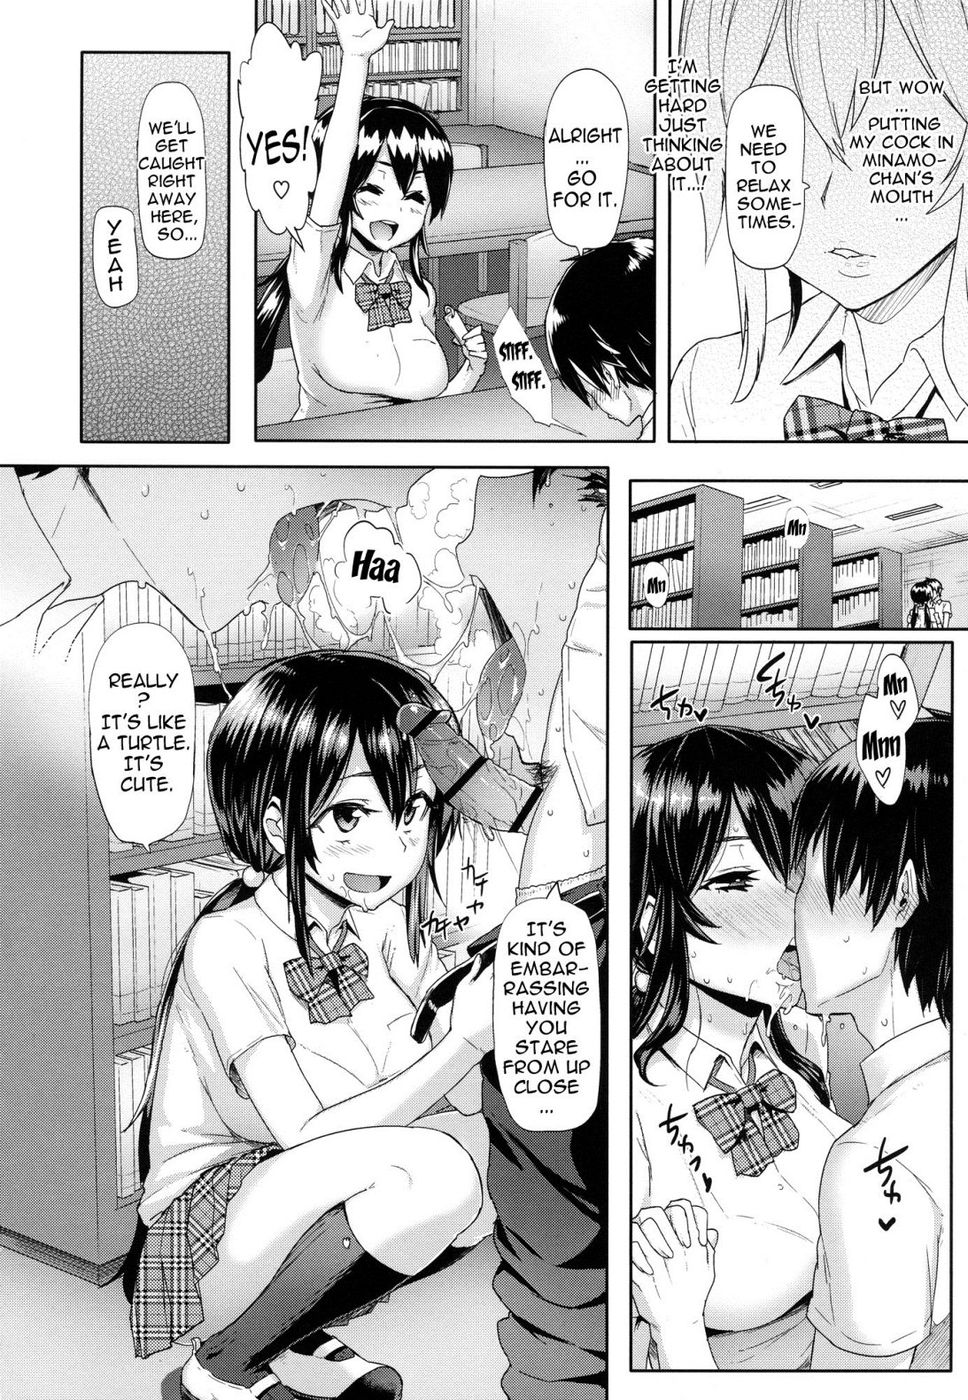 Hentai Manga Comic-Limit Break 3-Chapter 11-Disruption Of Morals ! After Days-2